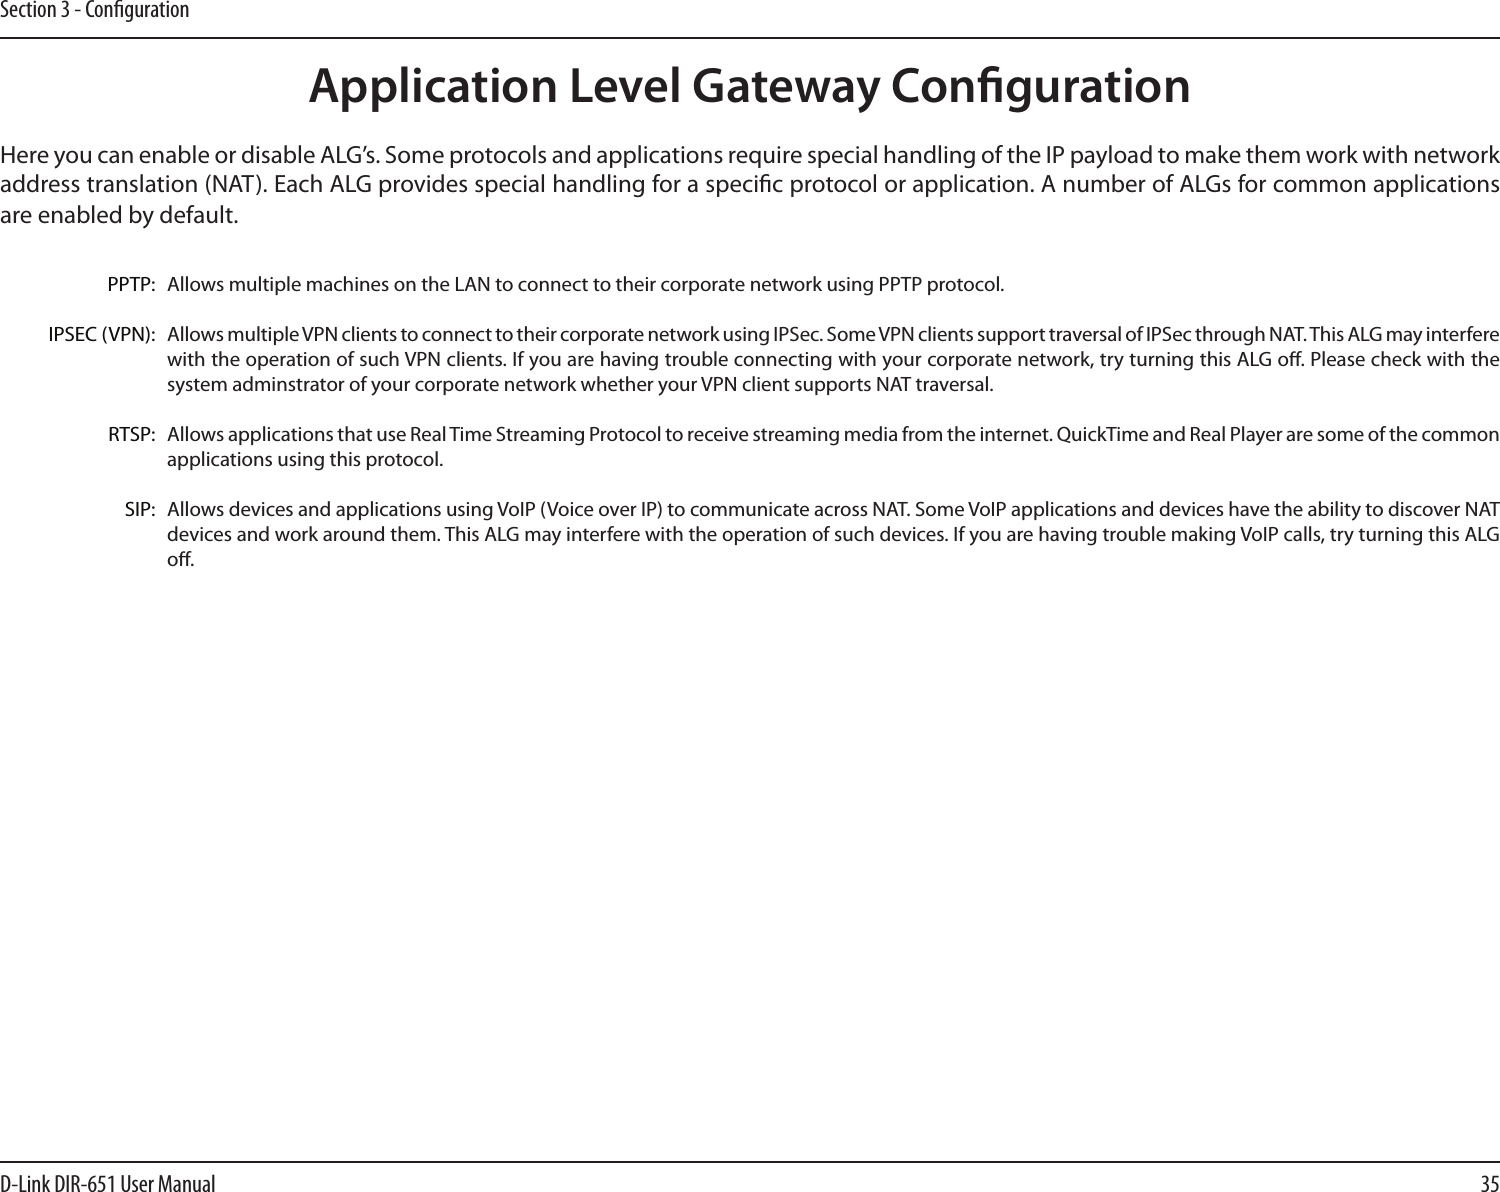 35D-Link DIR-651 User ManualSection 3 - CongurationApplication Level Gateway CongurationHere you can enable or disable ALG’s. Some protocols and applications require special handling of the IP payload to make them work with network address translation (NAT). Each ALG provides special handling for a specic protocol or application. A number of ALGs for common applications are enabled by default.Allows multiple machines on the LAN to connect to their corporate network using PPTP protocol. Allows multiple VPN clients to connect to their corporate network using IPSec. Some VPN clients support traversal of IPSec through NAT. This ALG may interfere with the operation of such VPN clients. If you are having trouble connecting with your corporate network, try turning this ALG o. Please check with the system adminstrator of your corporate network whether your VPN client supports NAT traversal.Allows applications that use Real Time Streaming Protocol to receive streaming media from the internet. QuickTime and Real Player are some of the common applications using this protocol. Allows devices and applications using VoIP (Voice over IP) to communicate across NAT. Some VoIP applications and devices have the ability to discover NAT devices and work around them. This ALG may interfere with the operation of such devices. If you are having trouble making VoIP calls, try turning this ALG o. PPTP:IPSEC (VPN):RTSP:SIP: